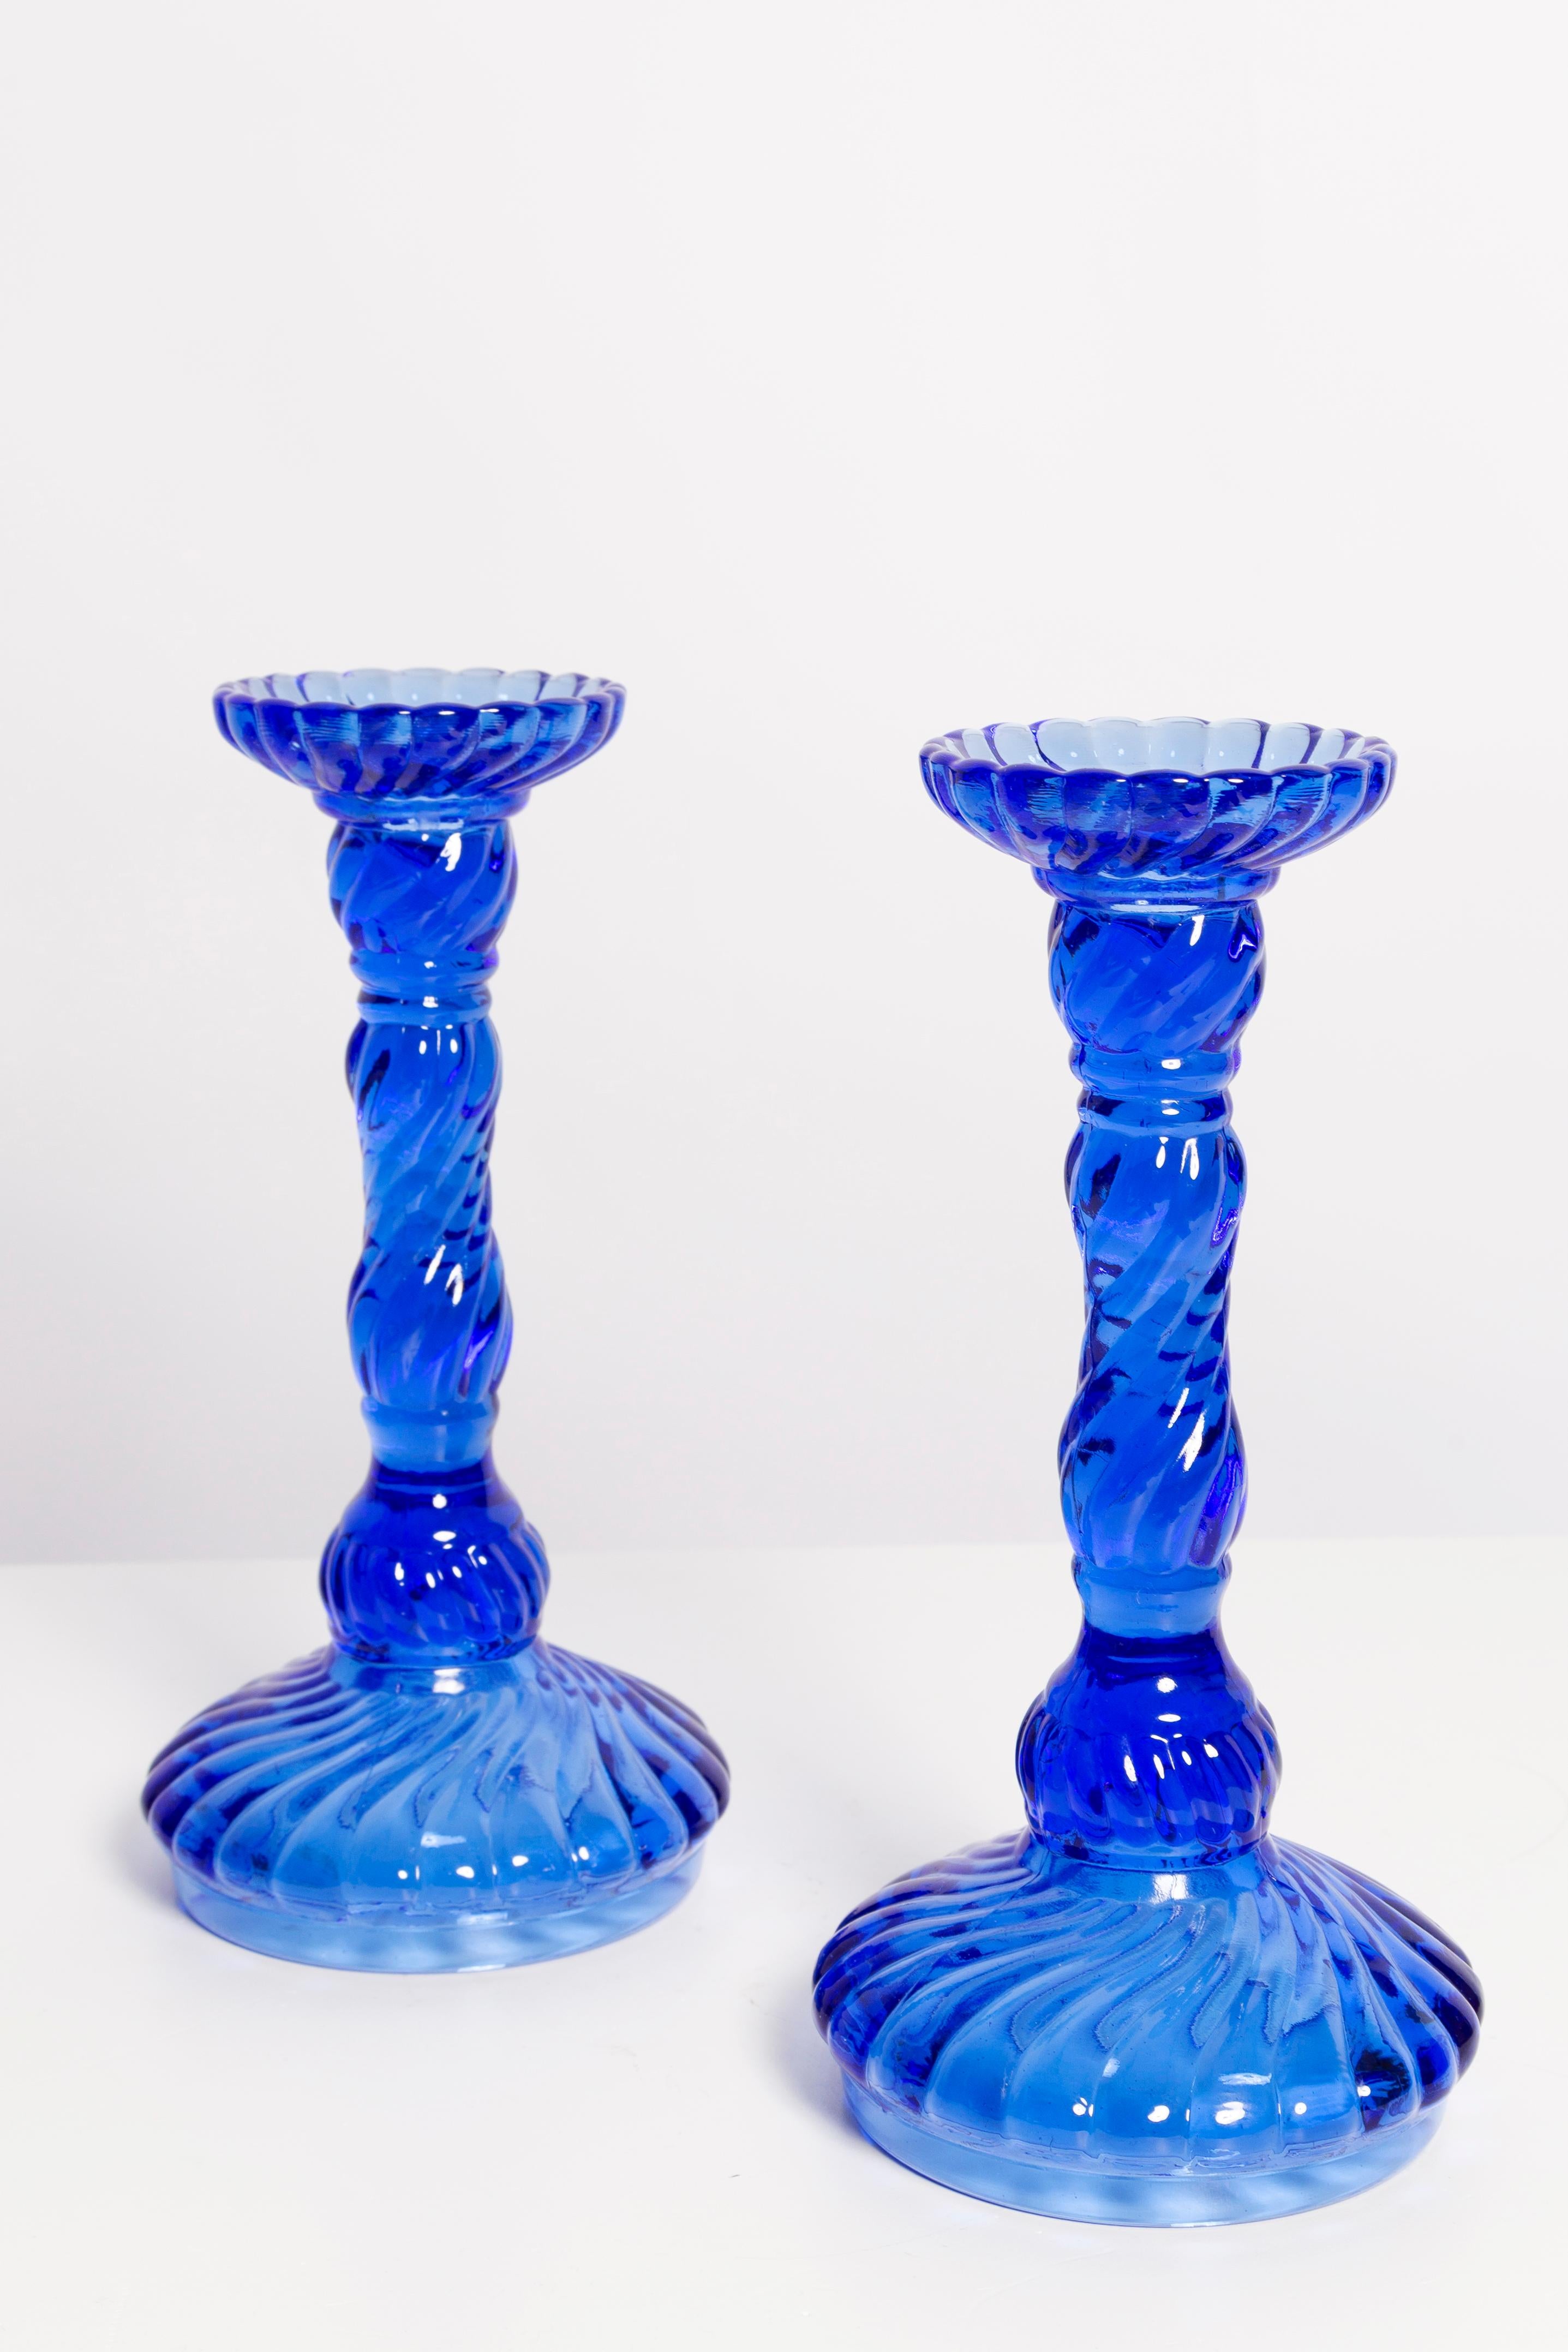 Set of two mid-century Polish modern glass candlesticks, circa 1960. Very good condition. No damages. Beautiful deep blue glass.